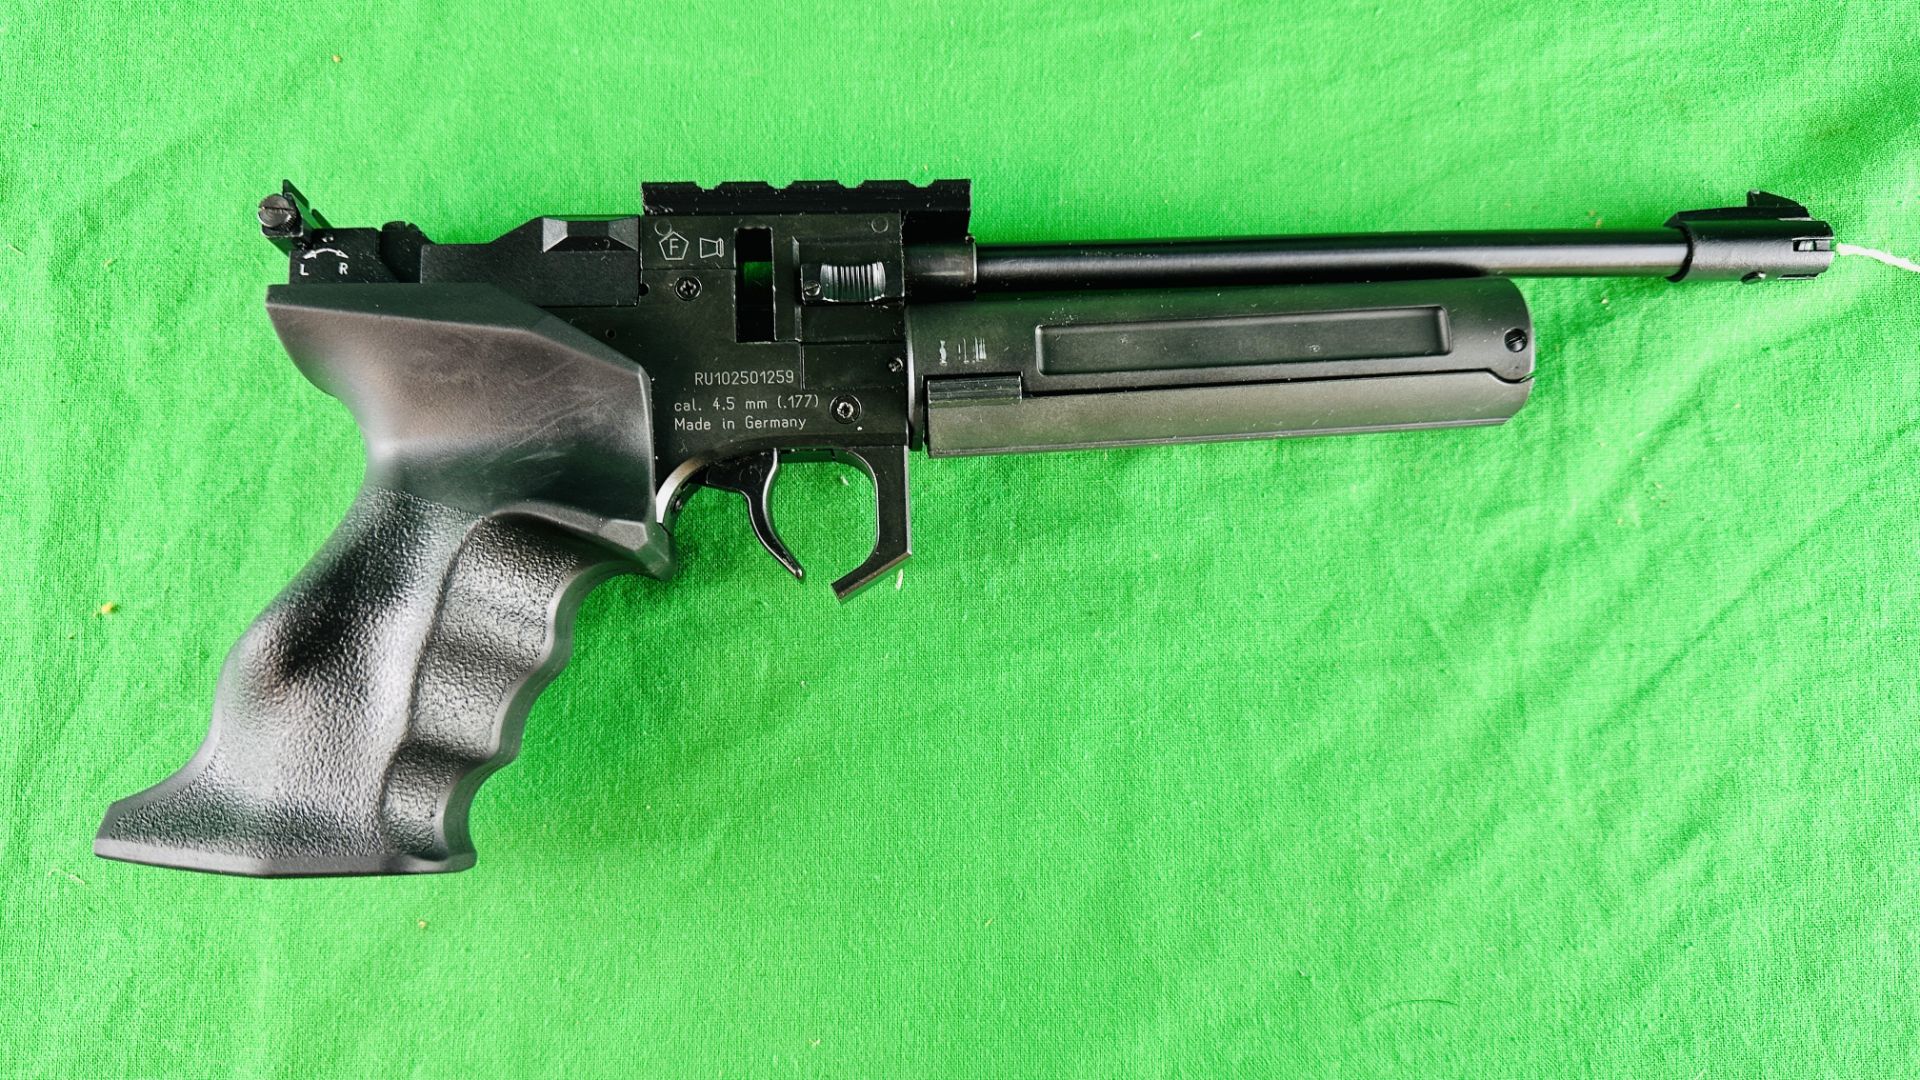 ROHM TWIN MASTER ACTION Co2 AIR PISTOL COMPLETE WITH ONE 8 SHOT MAGAZINE AND A ROHM SILENCER IN - Image 4 of 11